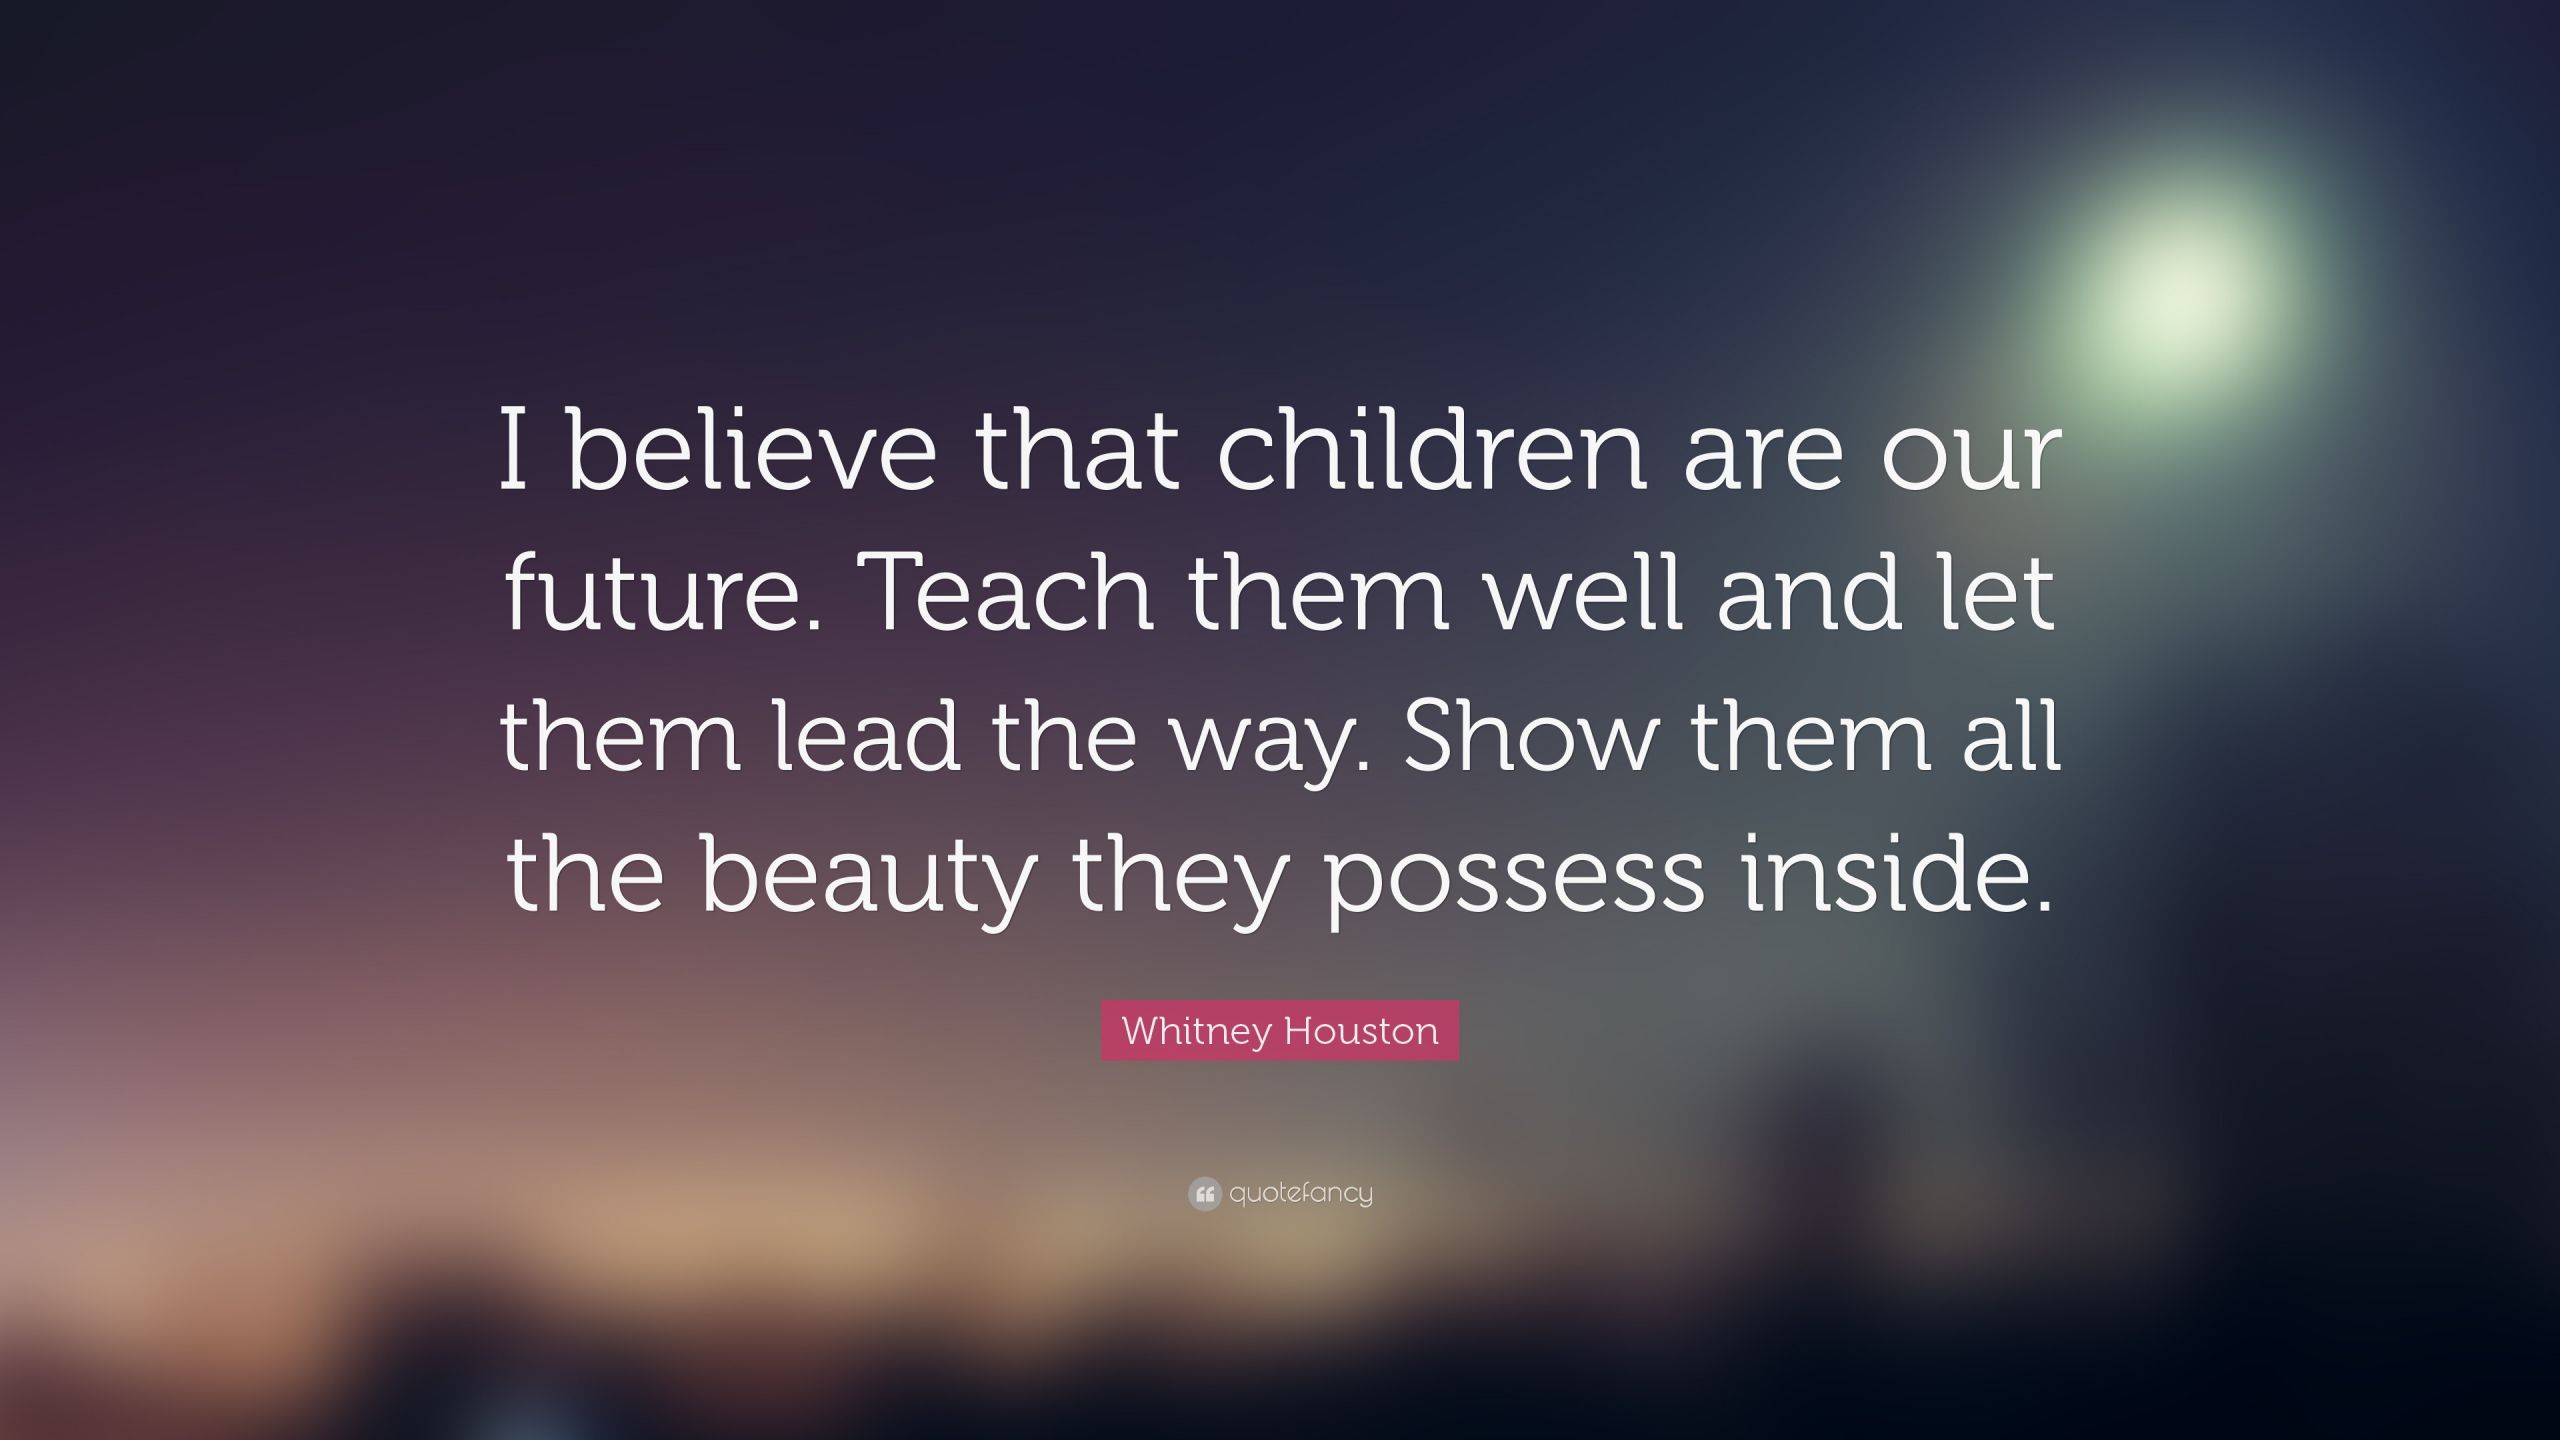 Children Are Our Future Quotes
 Whitney Houston Quote “I believe that children are our